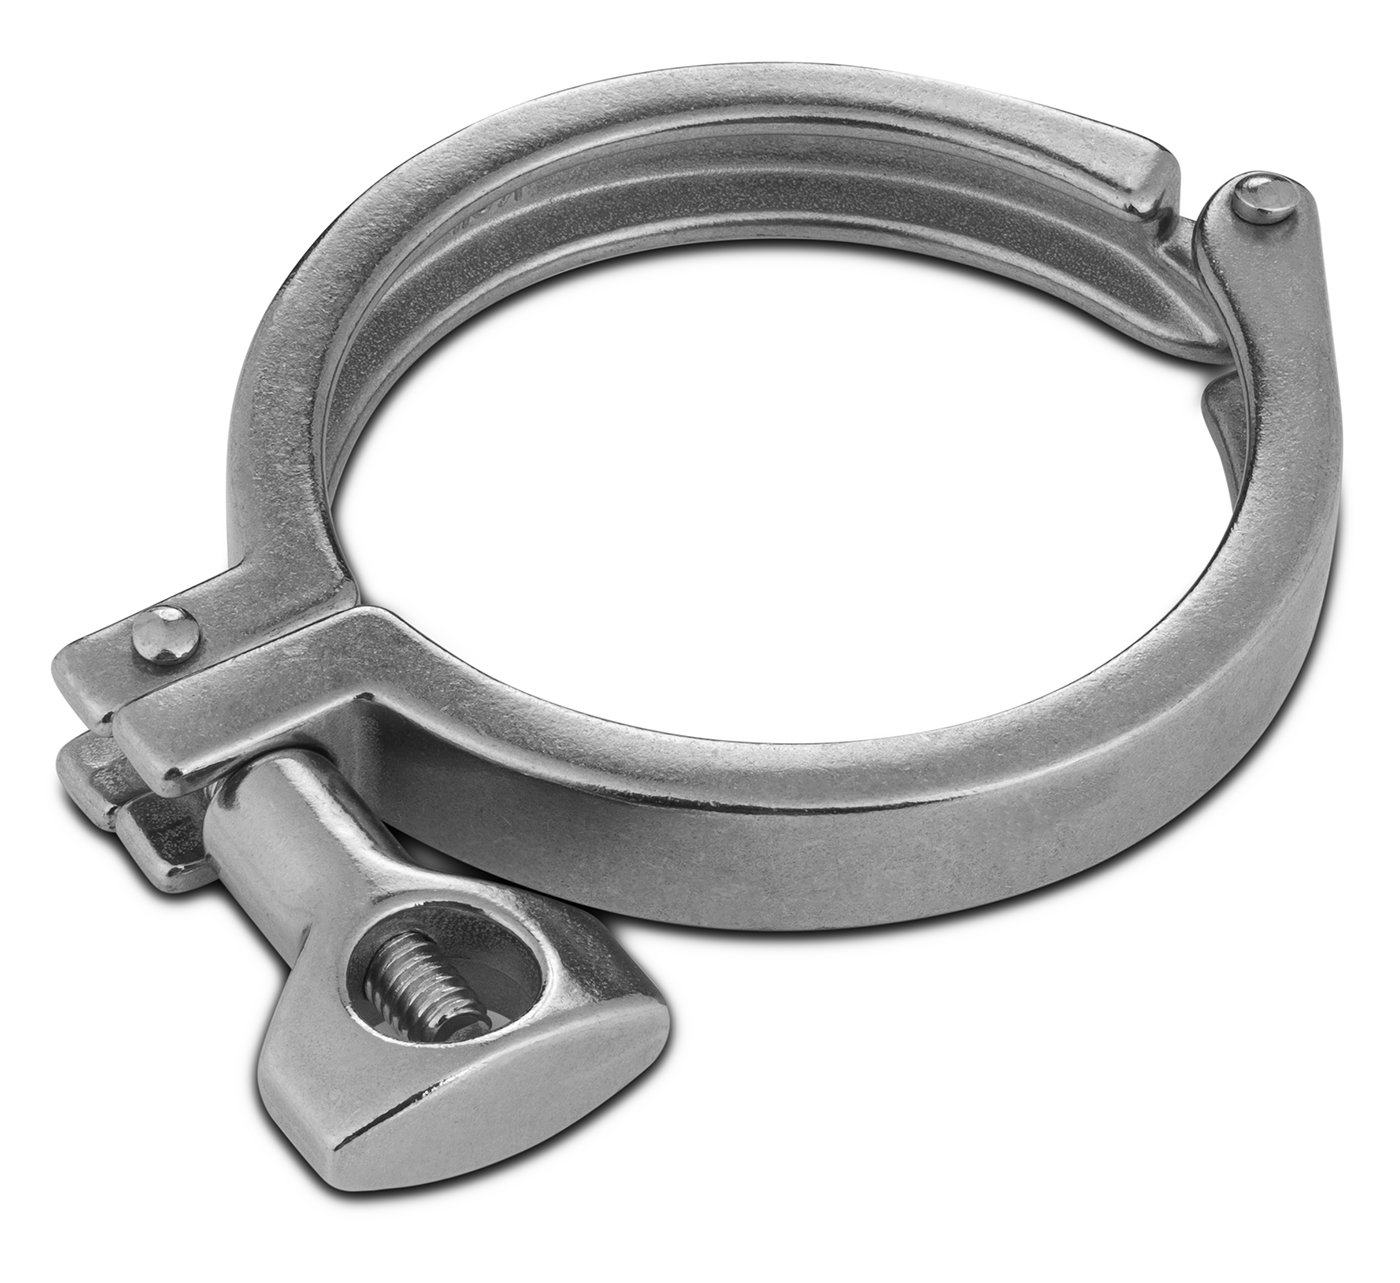 Tri-Clamp Single Hinge Clamp Questions & Answers